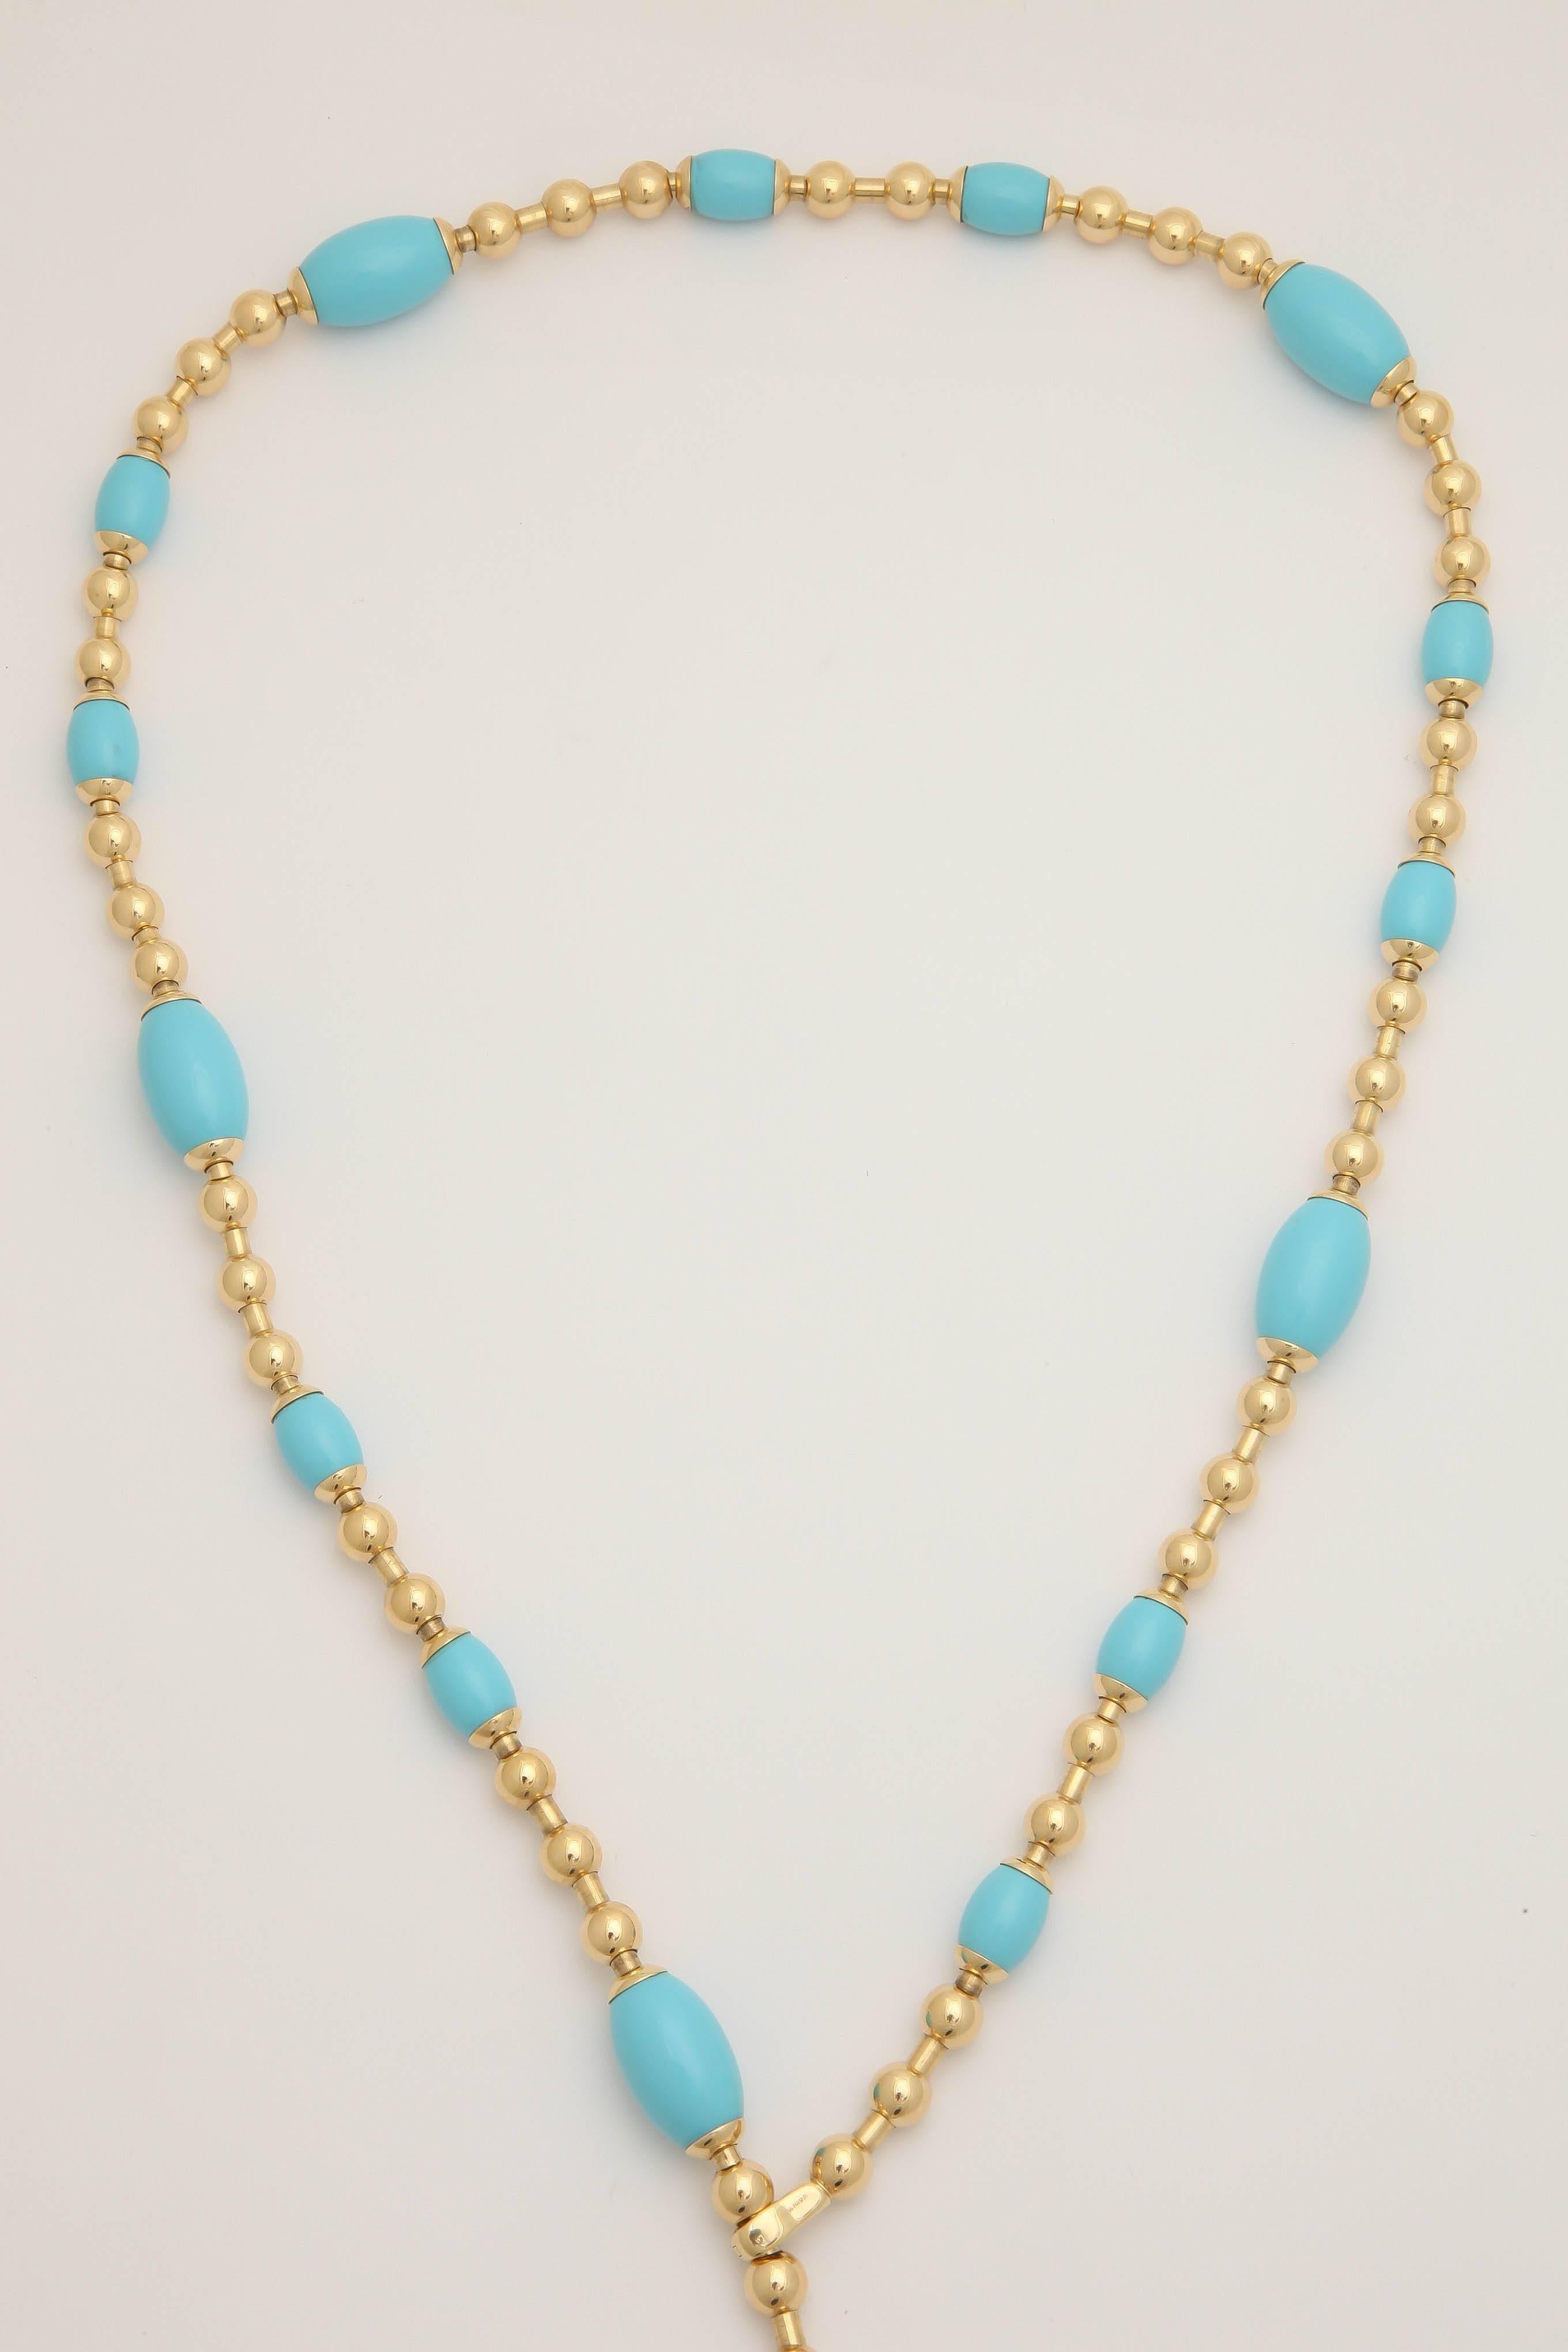 Faraone Mennella Turquoise Gold Tuka Tuka Necklace In New Condition For Sale In New York, NY